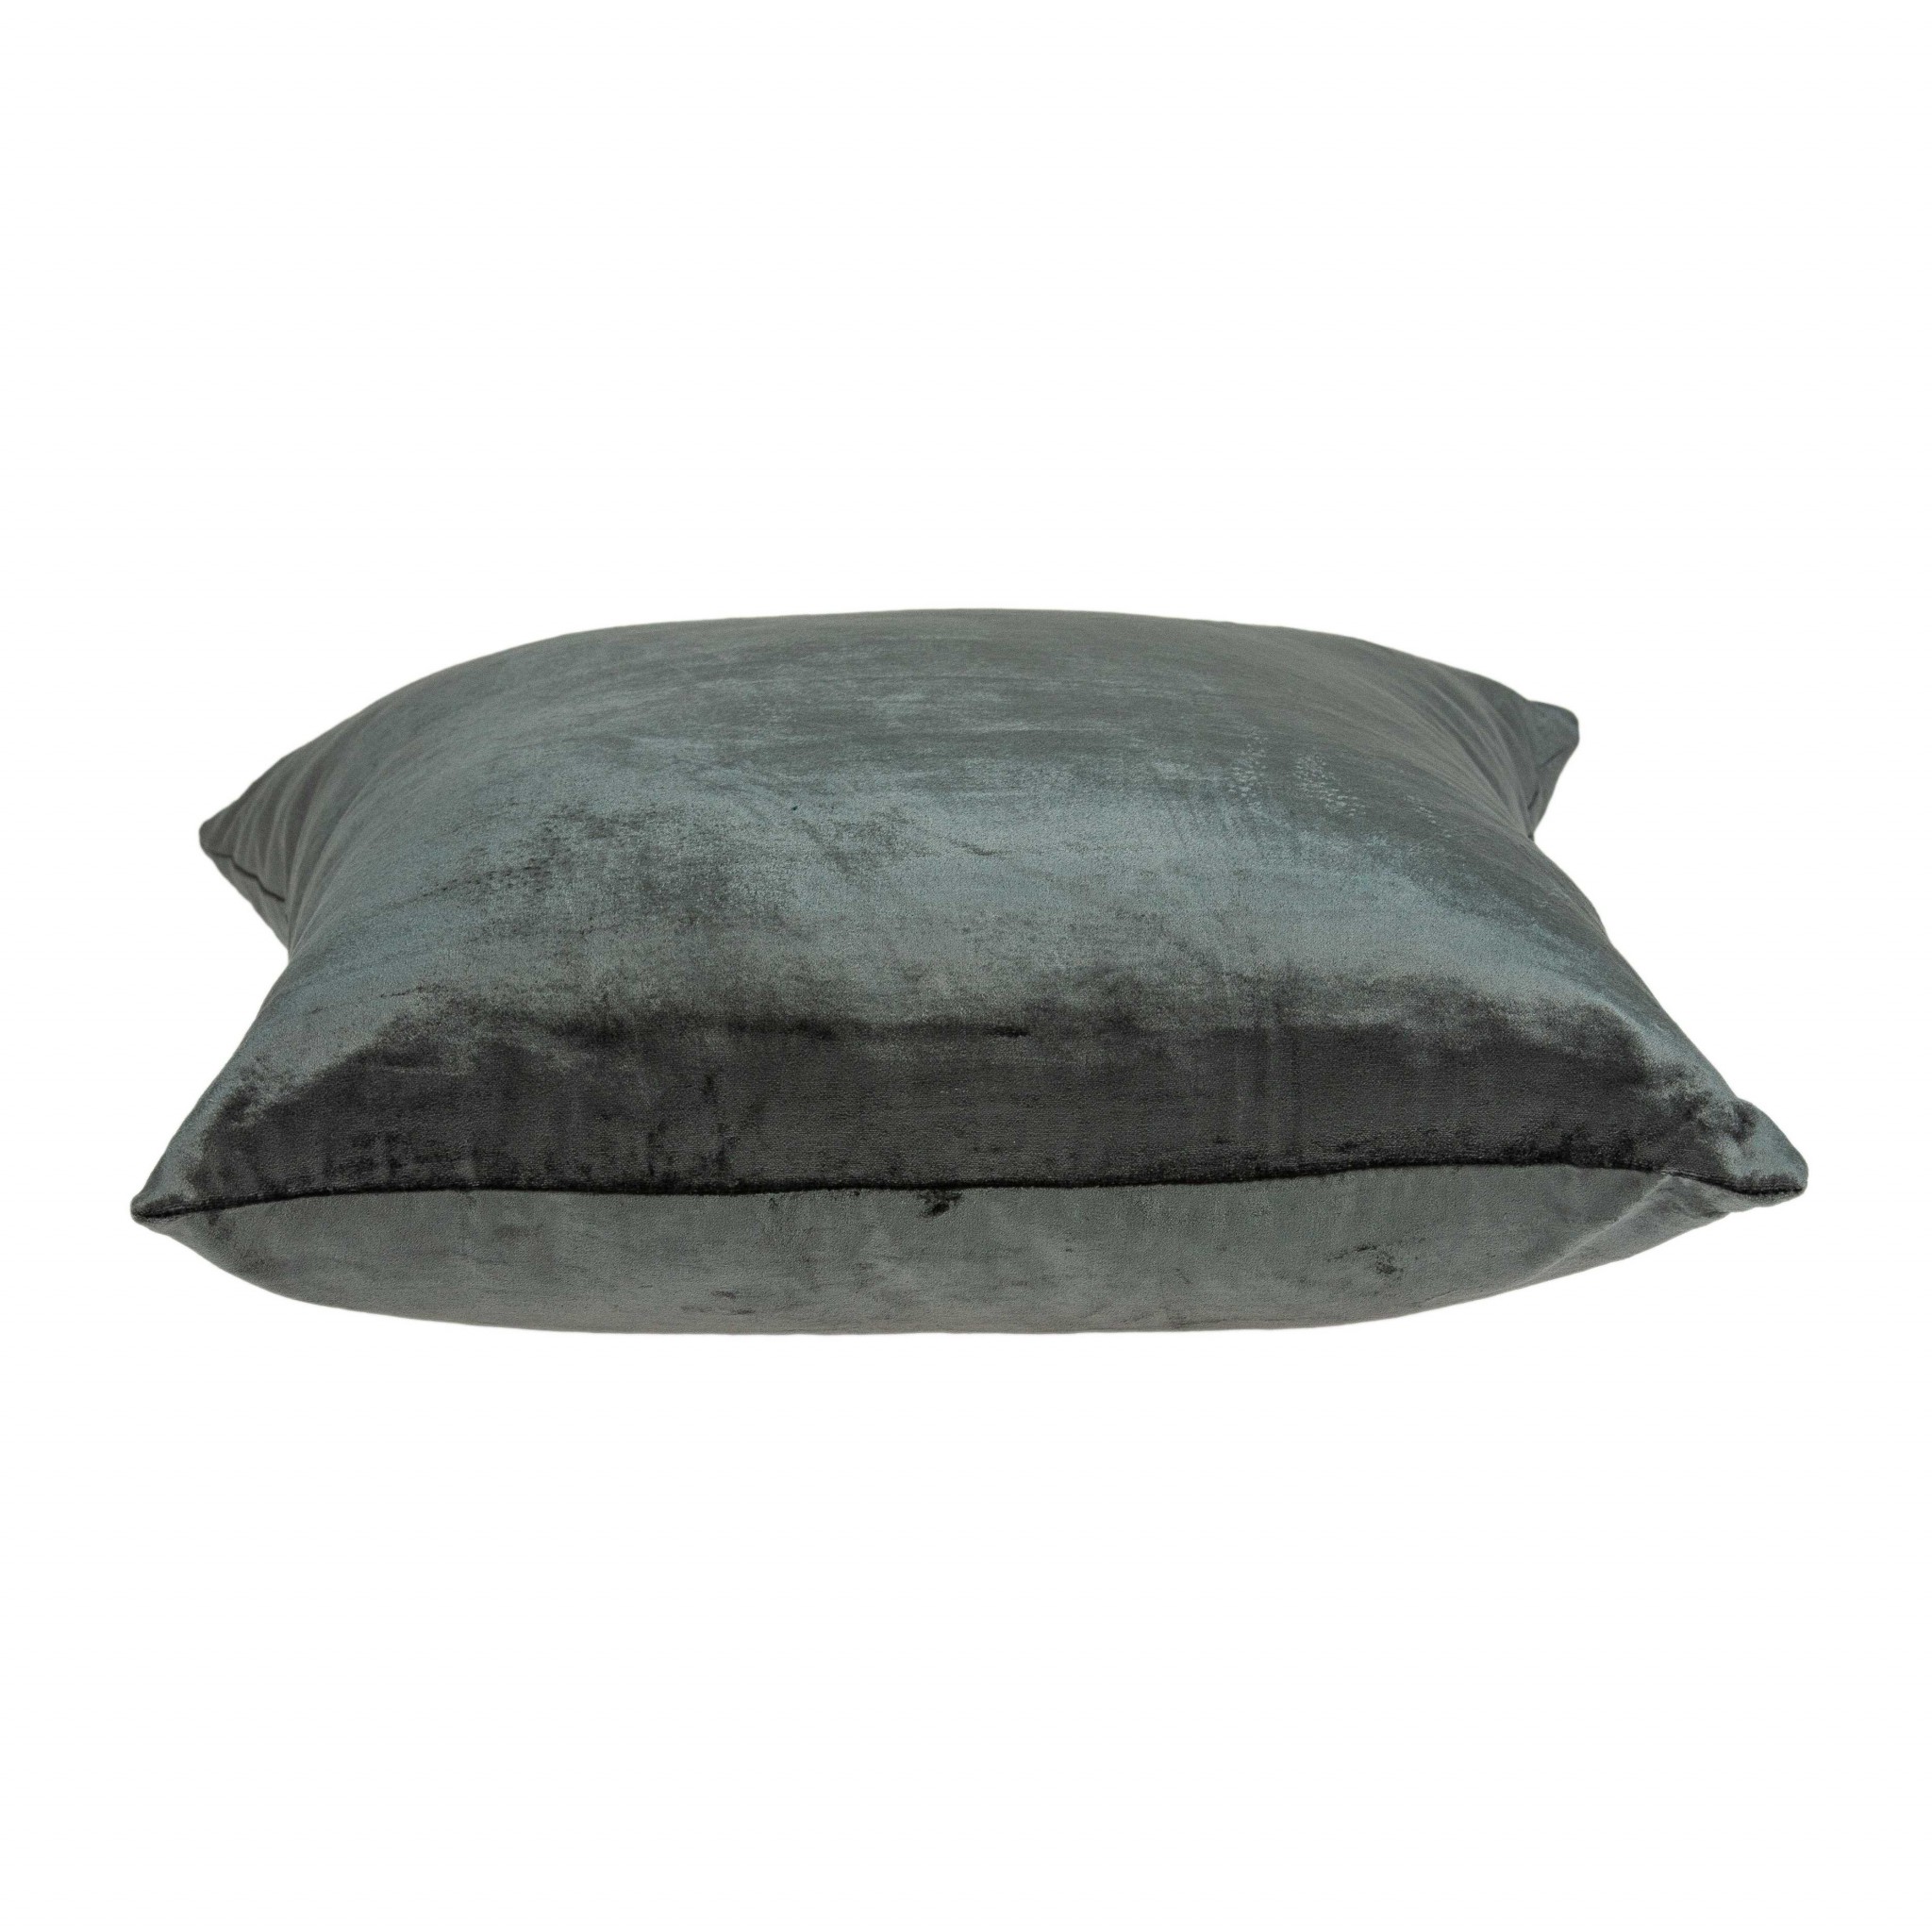 18" x 0.5" x 18" Transitional Charcoal Solid Pillow Cover